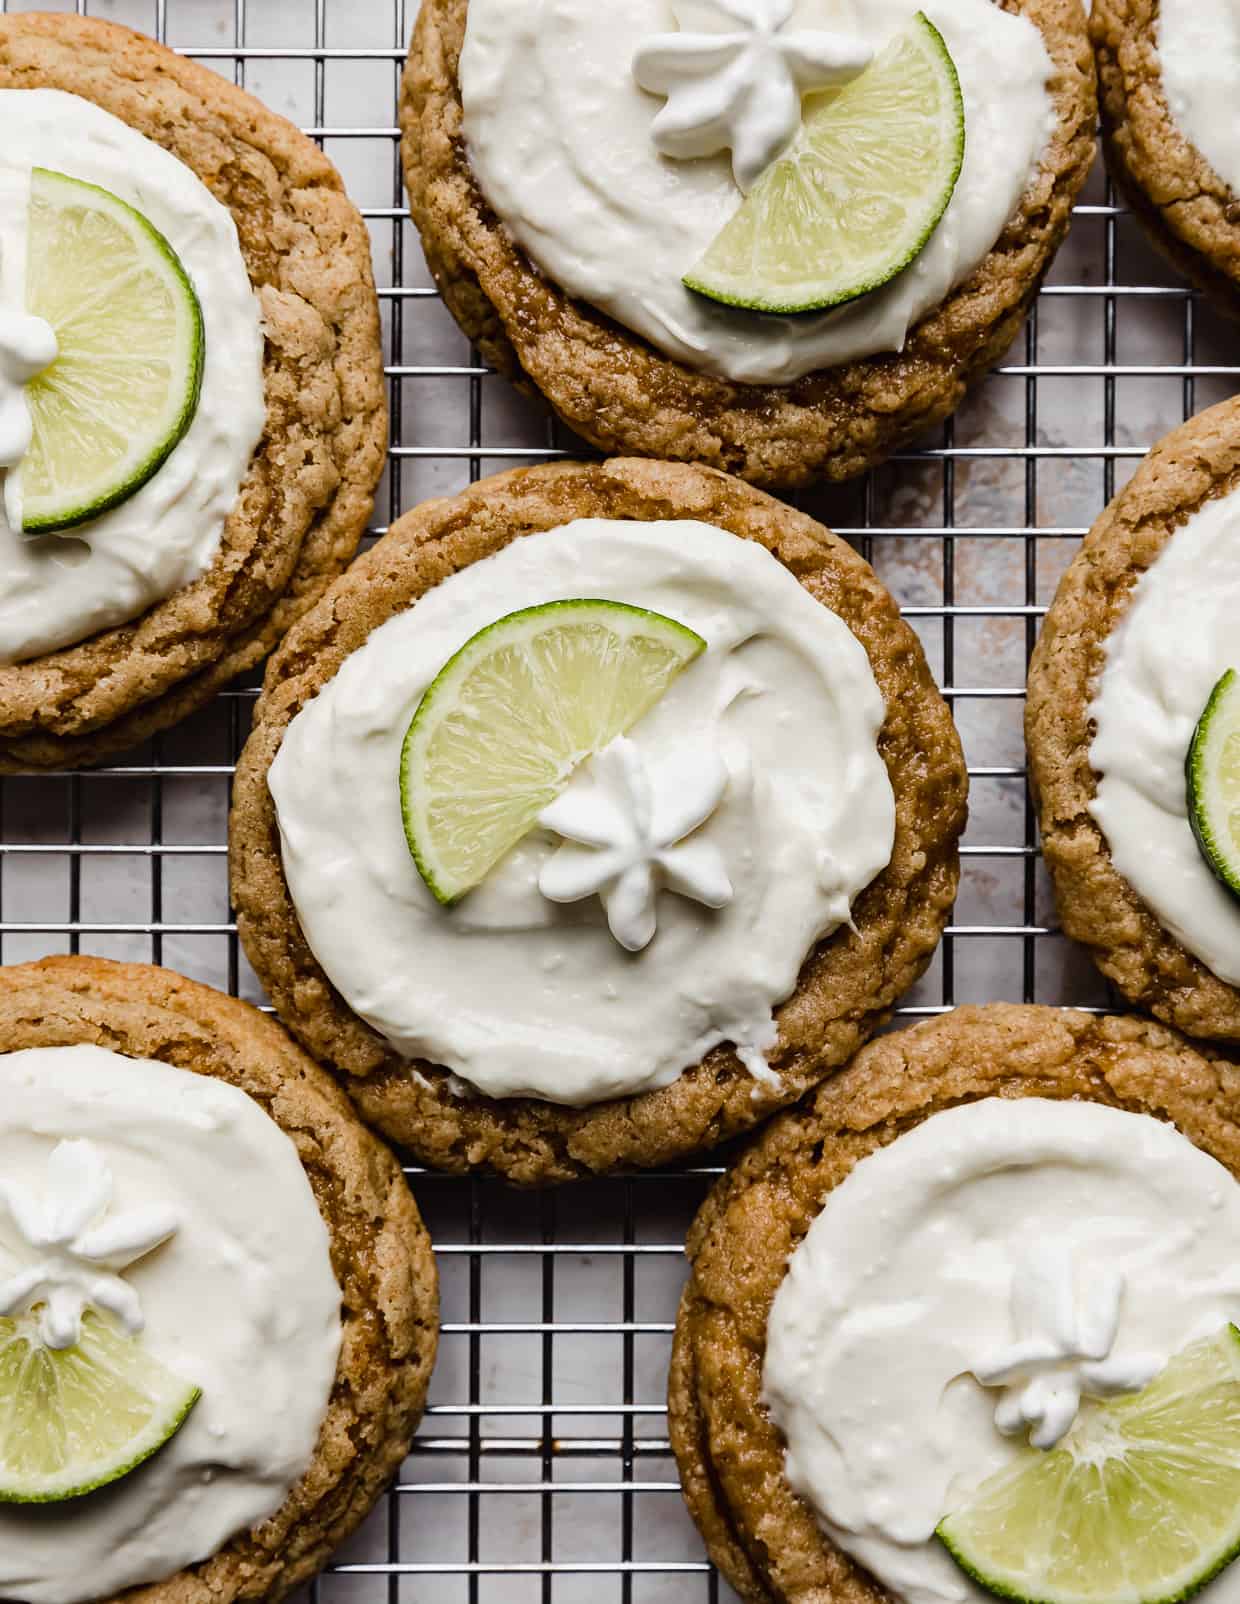 Crumbl Key Lime Pie Cookies topped with whipped topping and a lime wedge on a wire cooling rack.